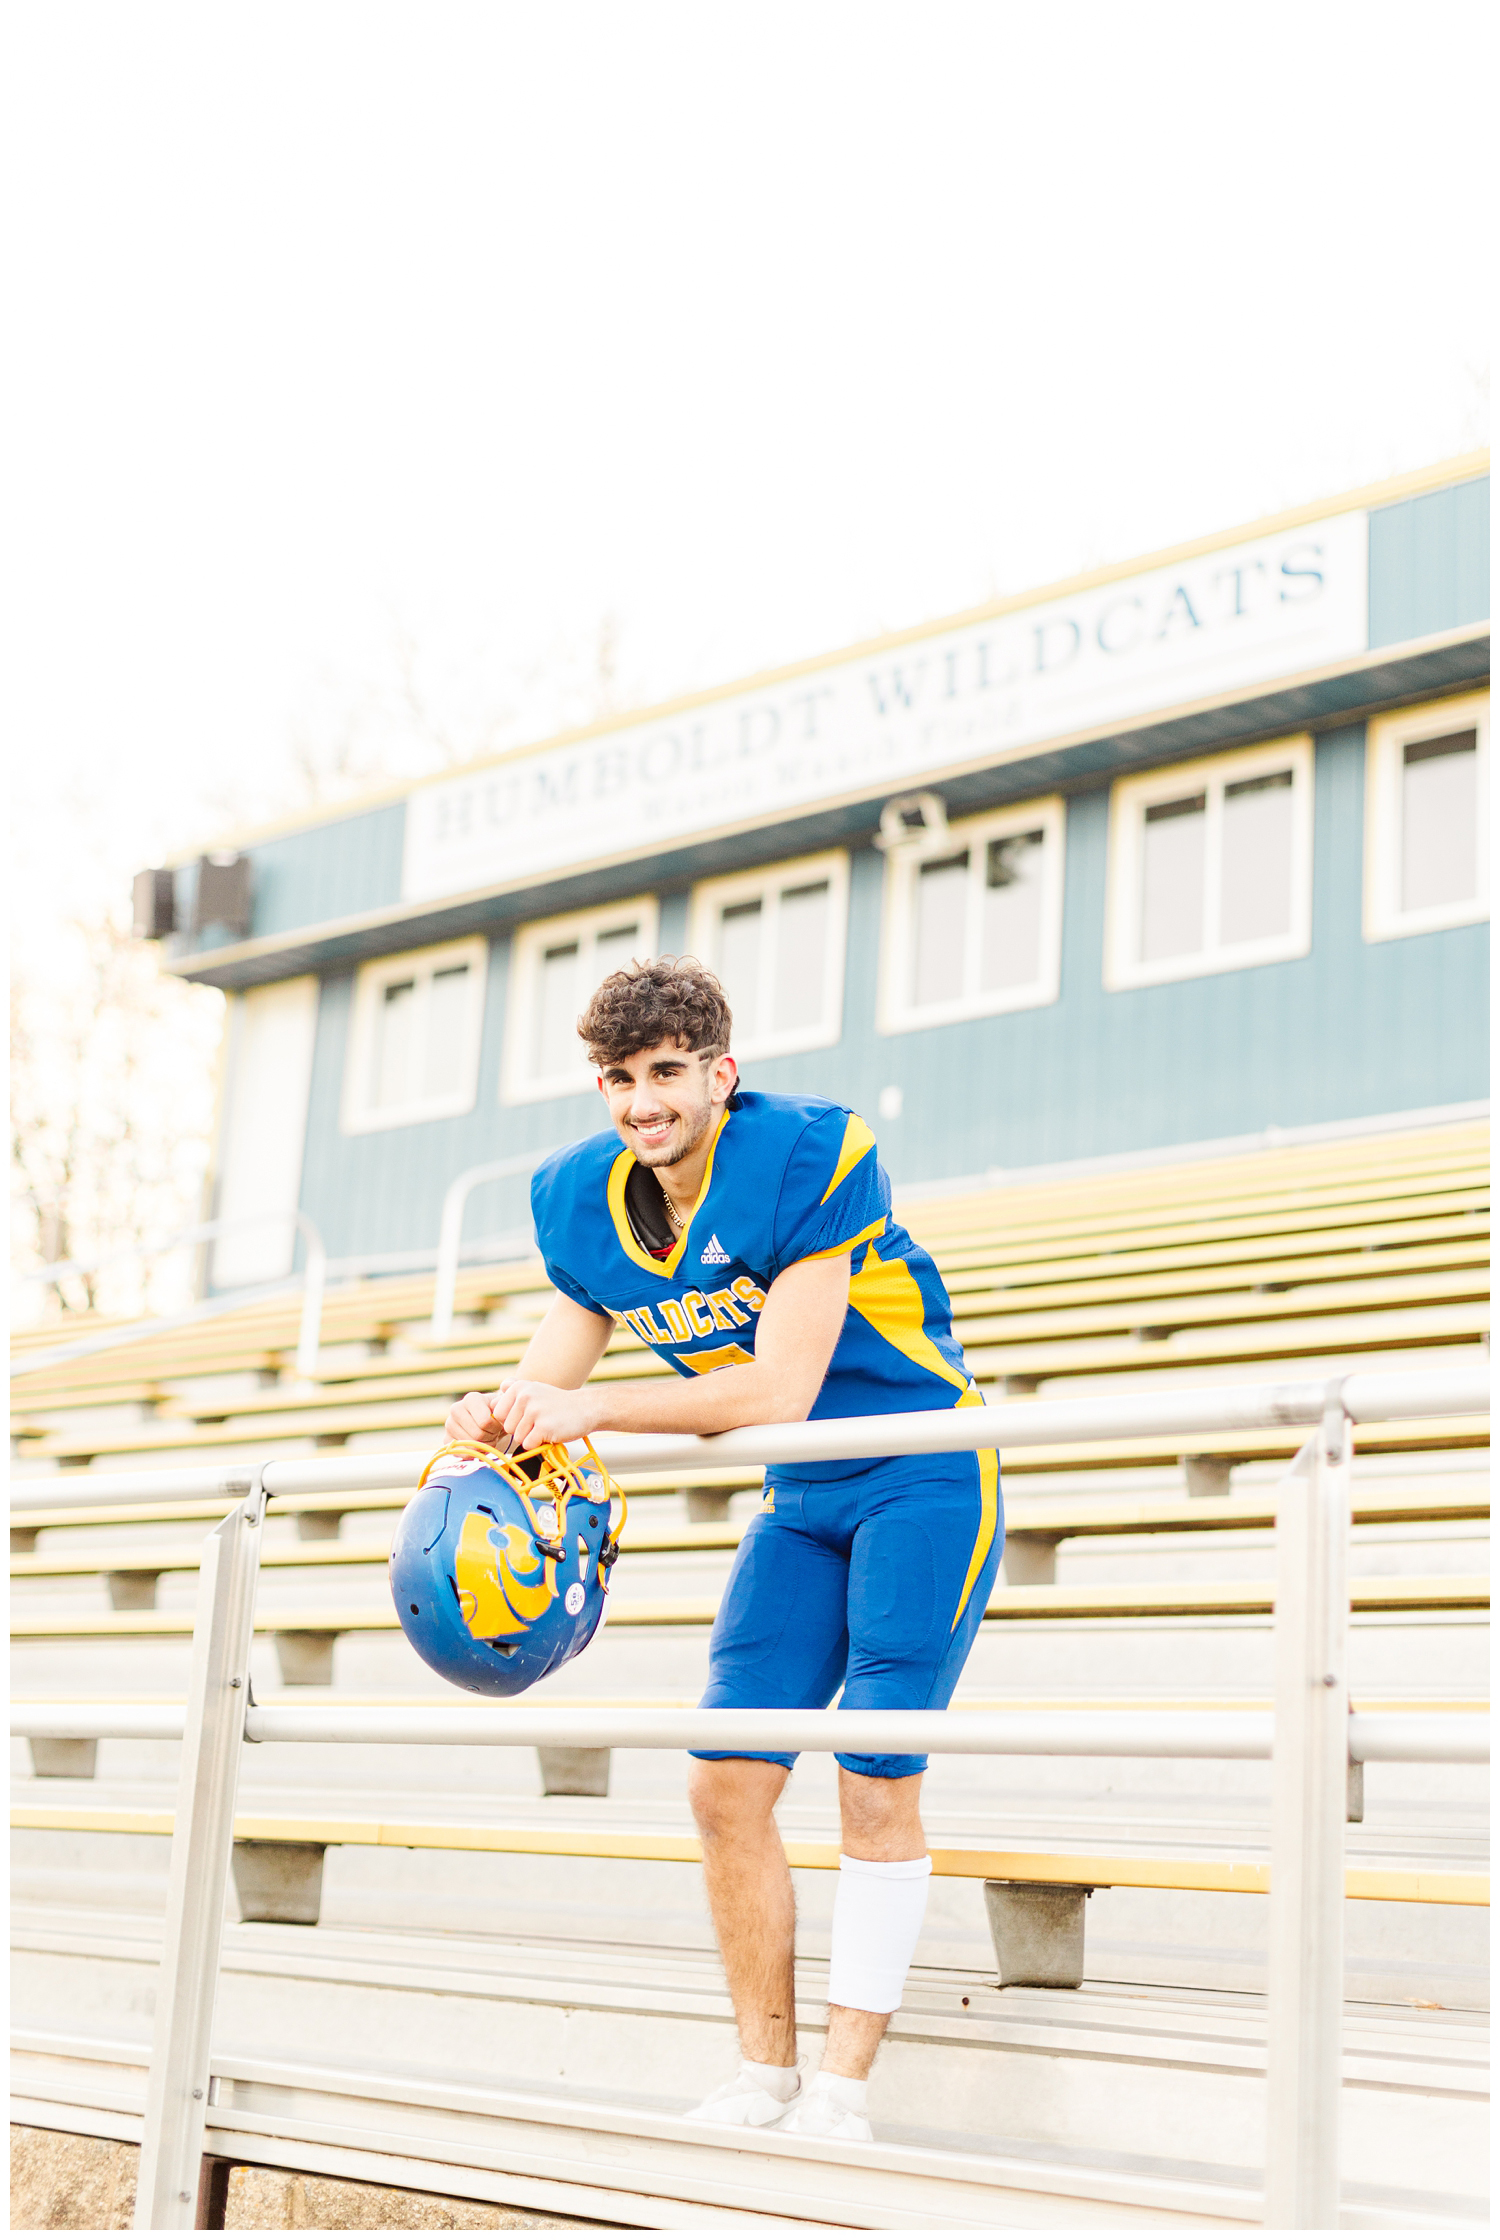 Sam, a senior football player at Humboldt HS, leans over the bleach railing on the foot ball field | CB Studio